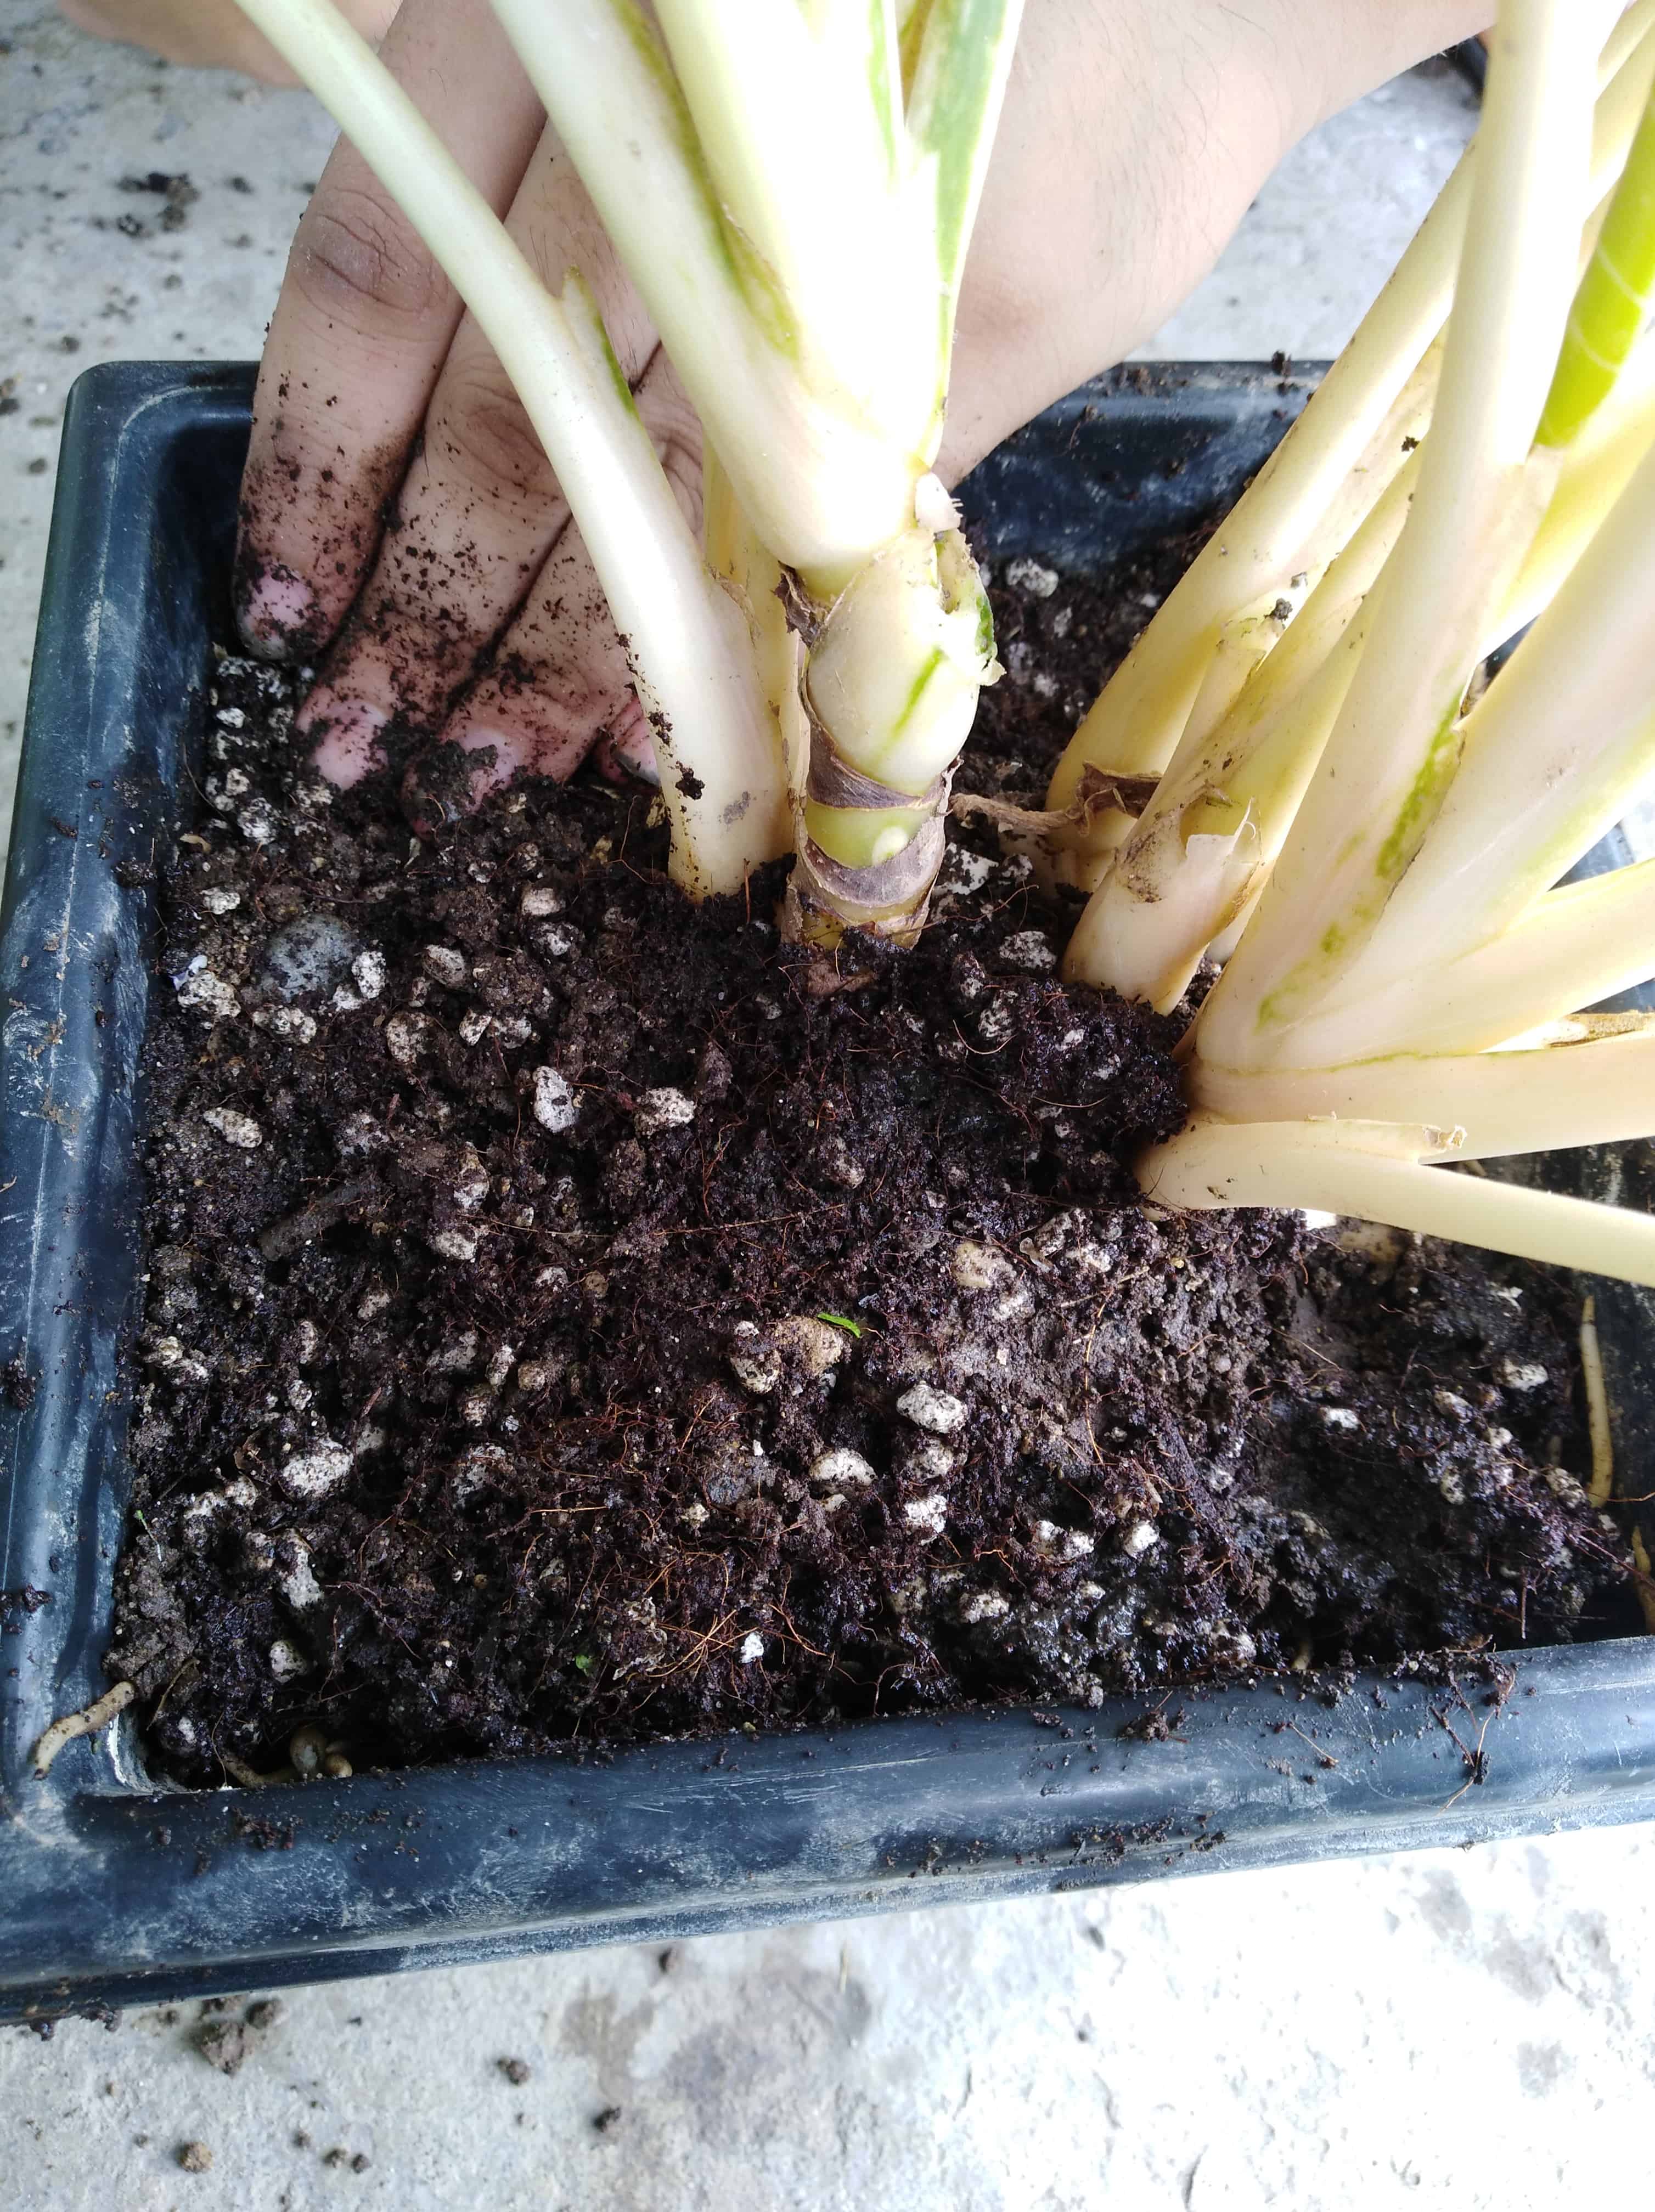 Planting the recently-trimmed-rootbound plant into a new pot with fresh soil.